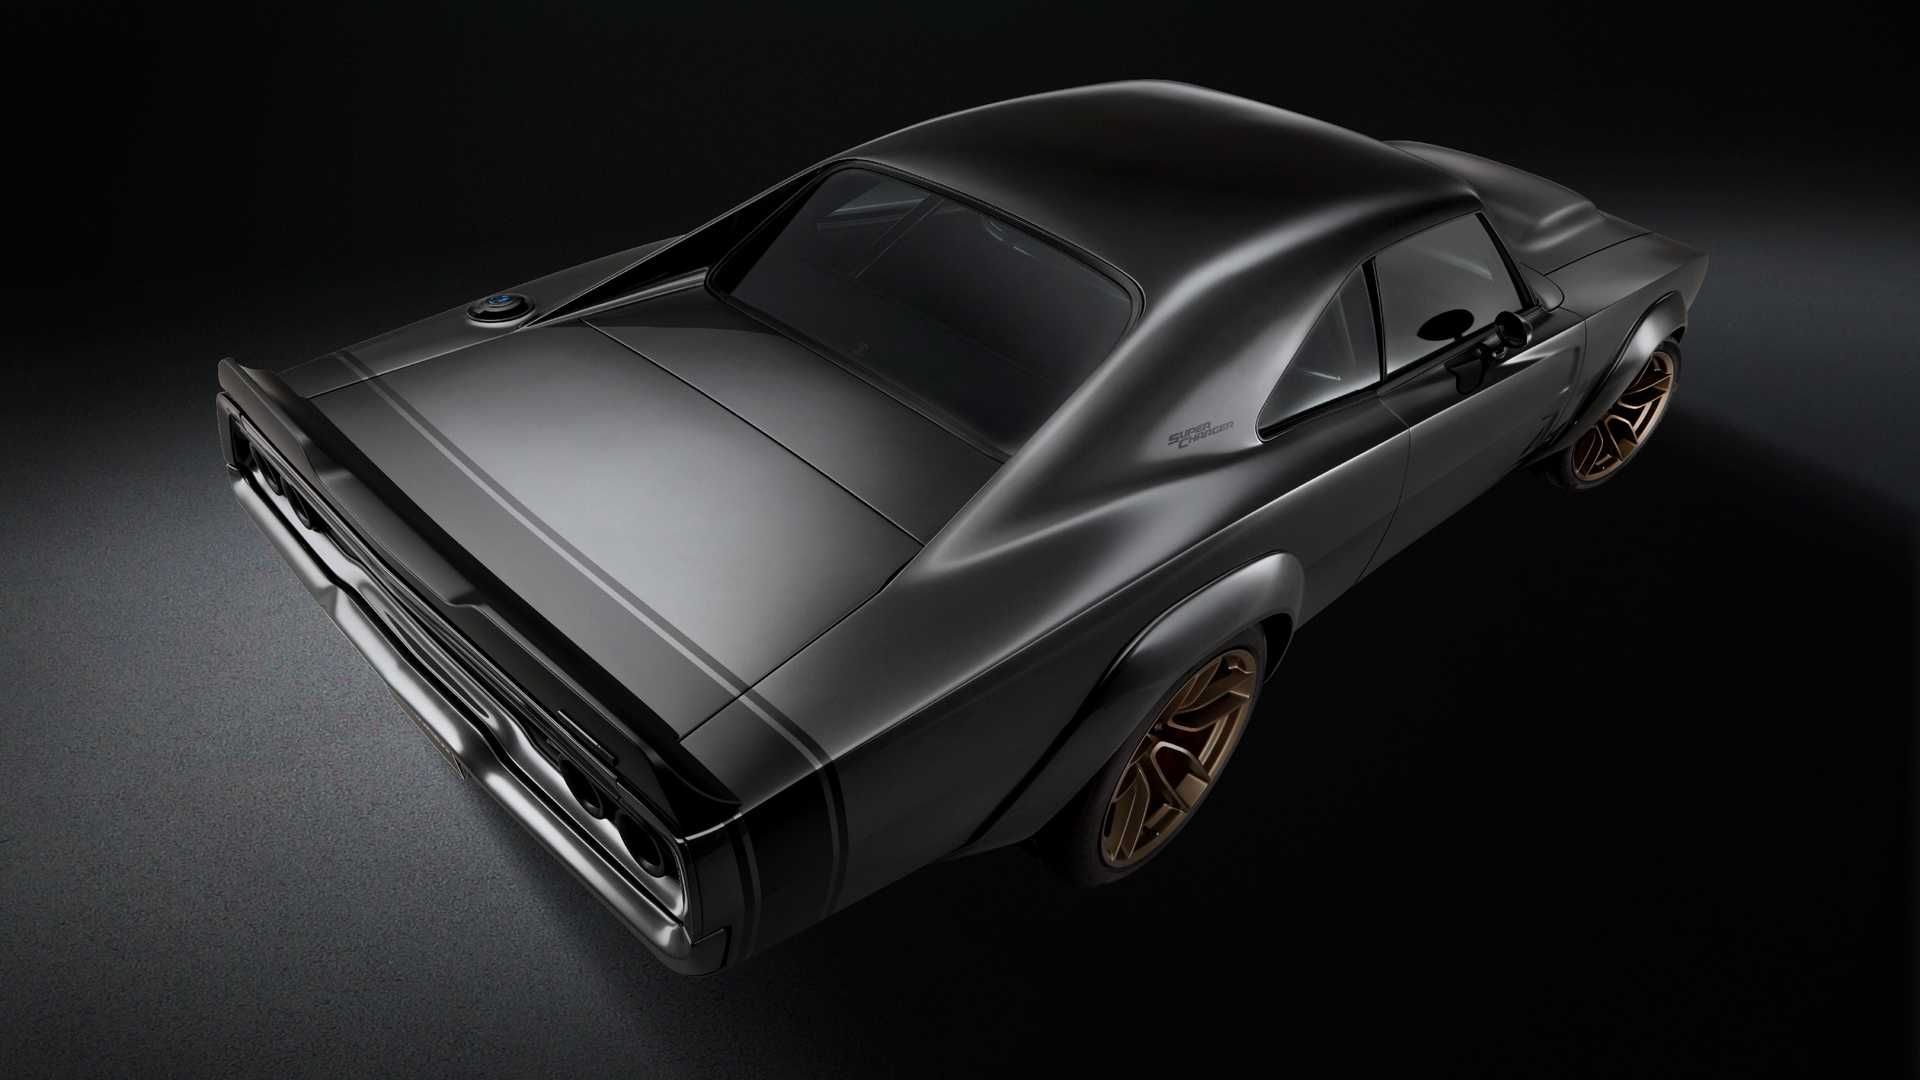 1968 Dodge Charger / دوج چارجر 